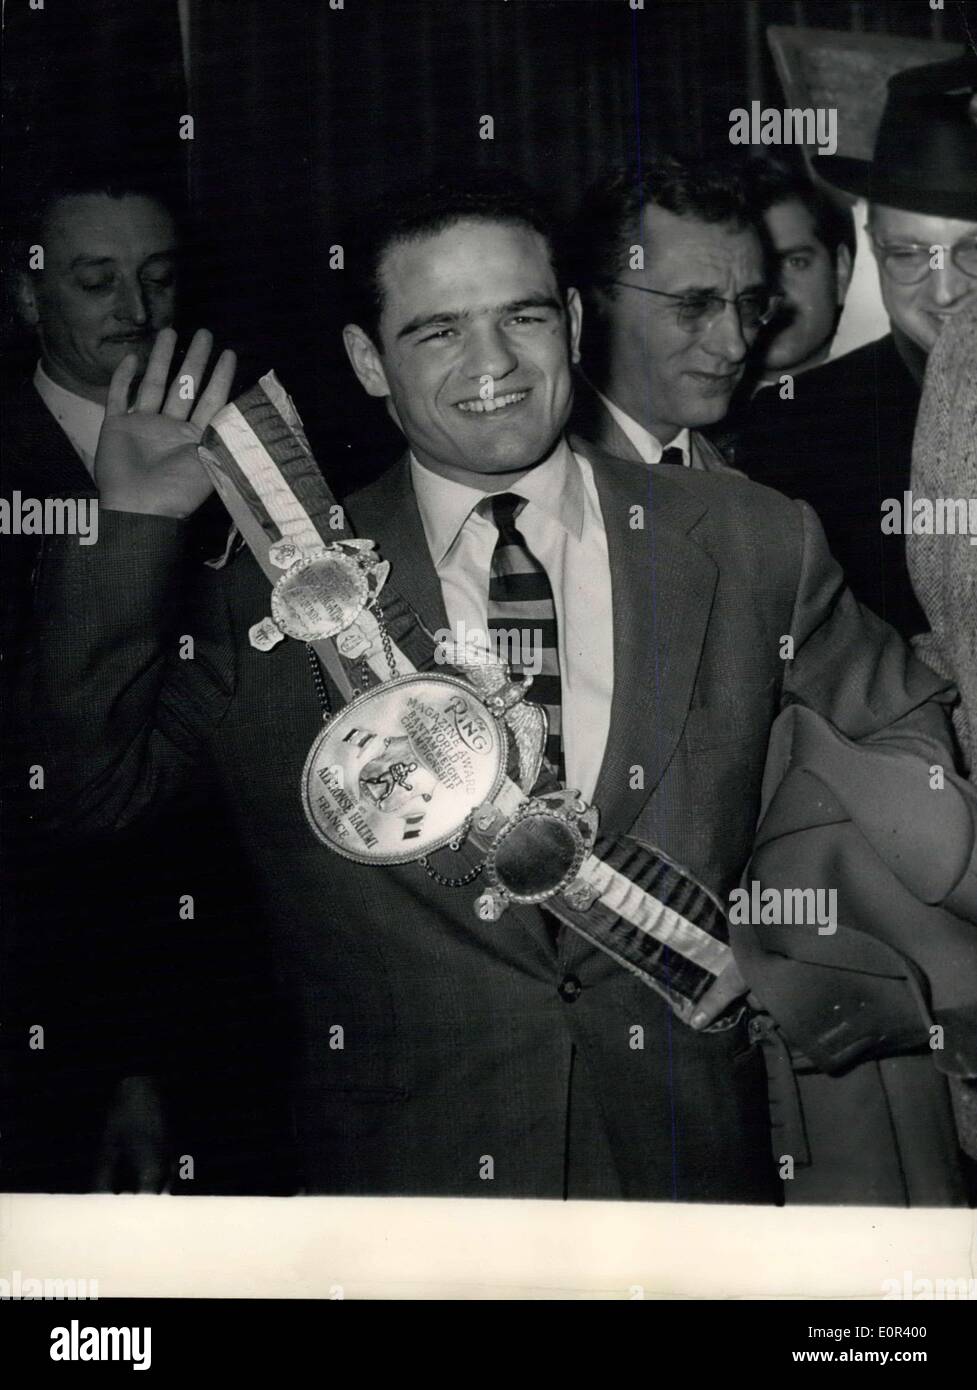 Nov. 13, 1957 - Halimi Back In Paris: Alphonse Halimi who won the title of the world lightweight champion after his fifty with Macias in Los Angeles recently returned to Paris today. Photo shows Halimi seen proudly exhibited his champion's belt awarded by the American ''Ring Magazine'' on his arrival at Orly Airport this morning. Stock Photo